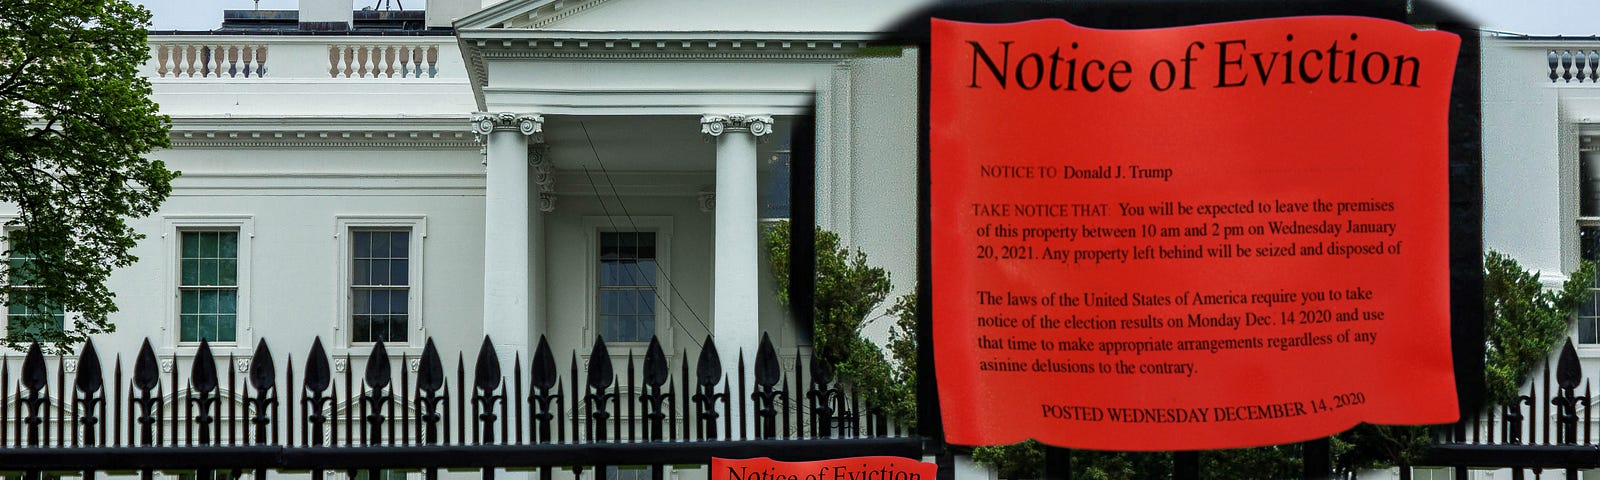 Eviction notice posted at White House